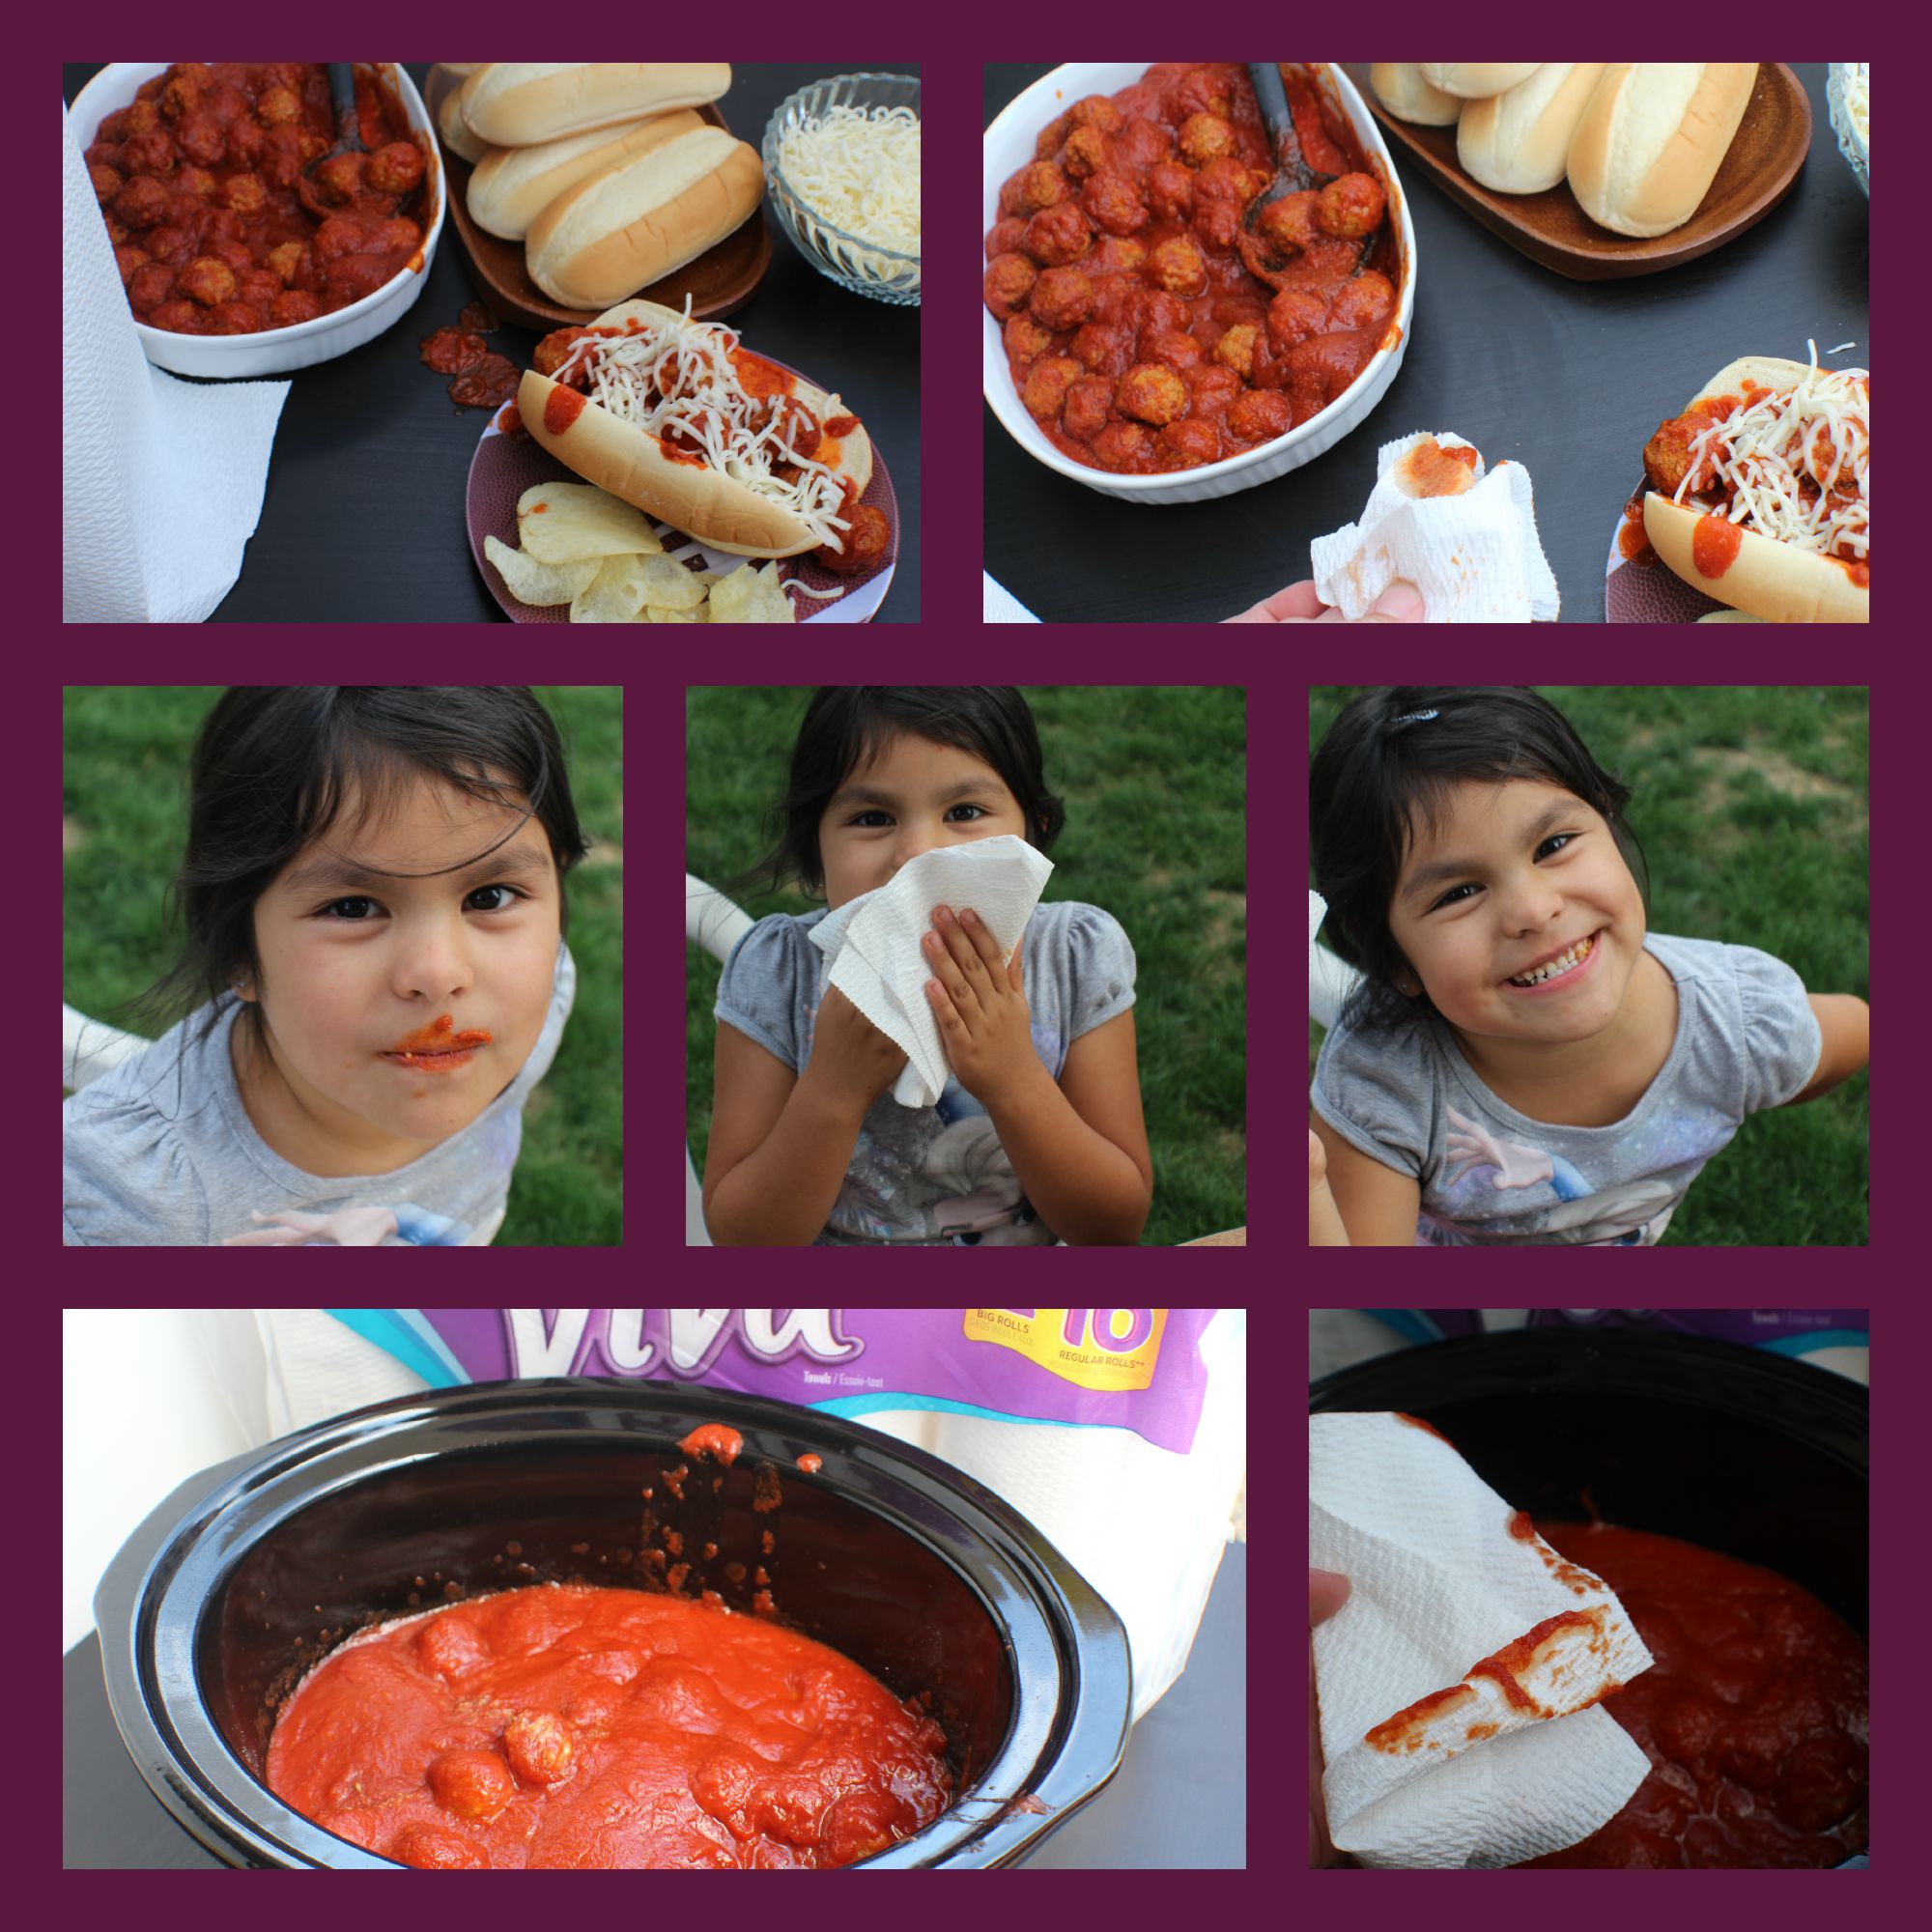 Collage of meatball subs with little girl cleaning her face and viva papertowels